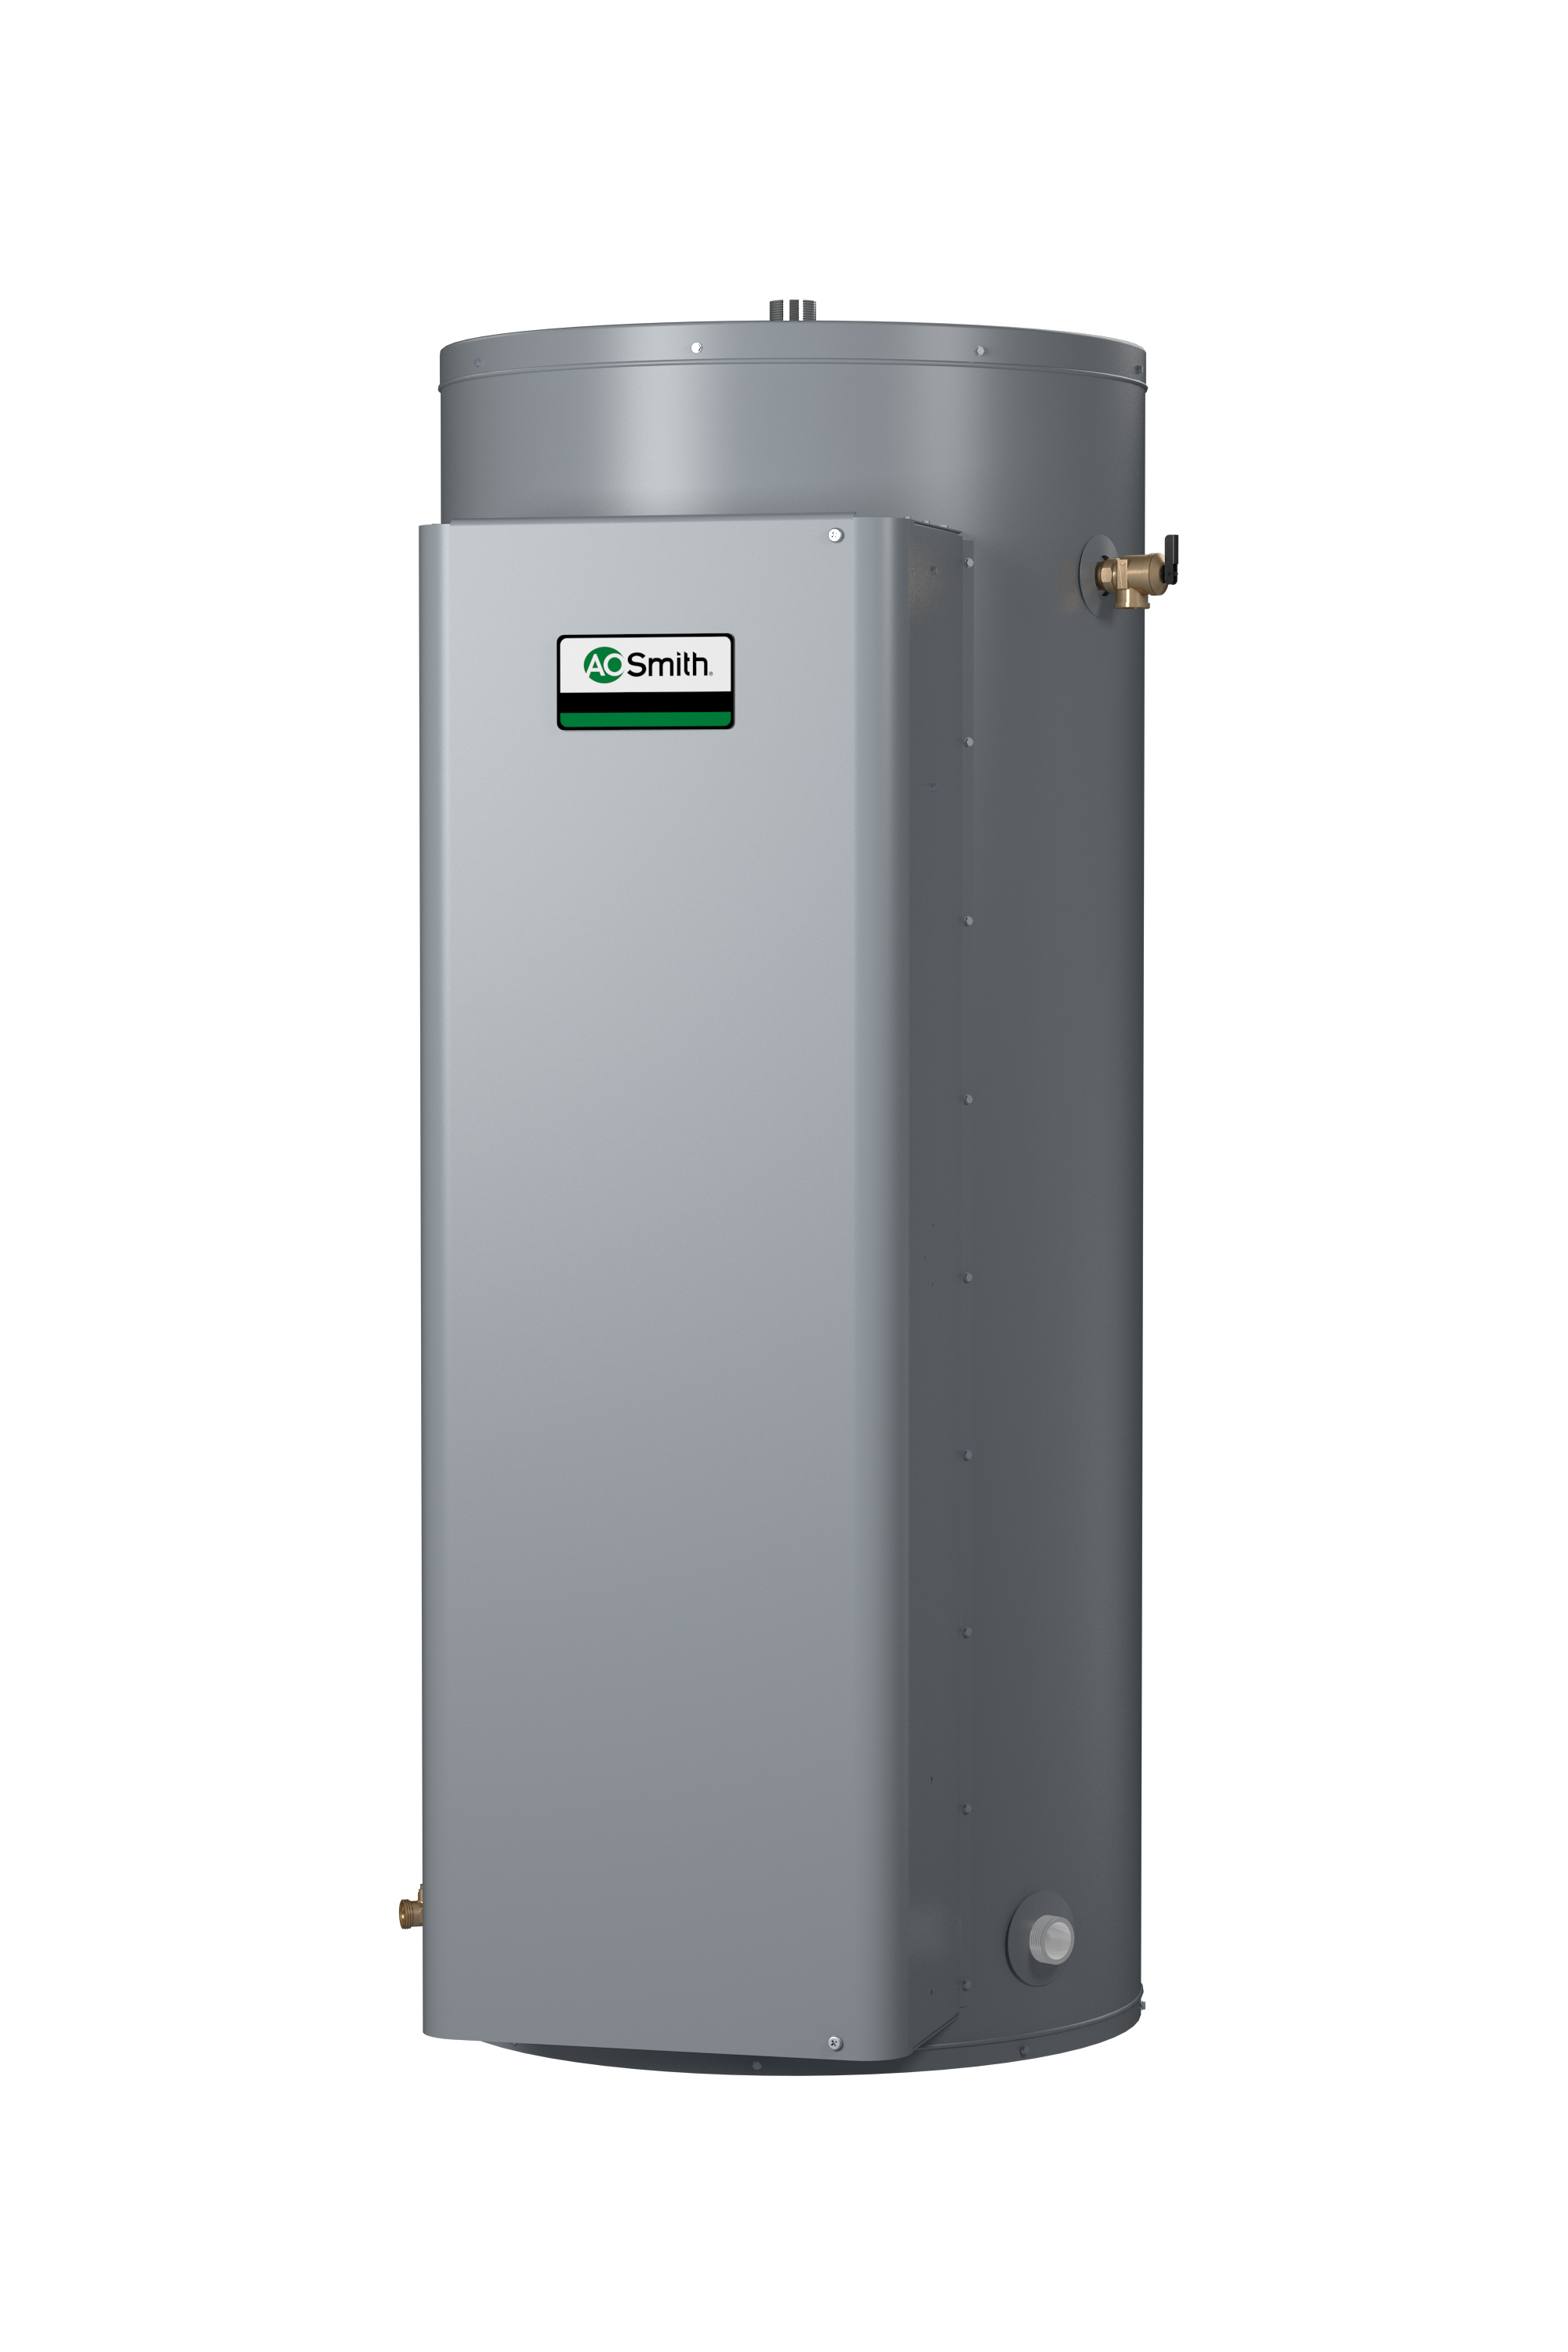 AO SMITH DRE-120-13.5, 119 GALLON, 13.5KW, 480 VOLT, 28.12 AMPS, 1 PHASE, 3 ELEMENT, COMMERCIAL ELECTRIC WATER HEATER, GOLD SERIES